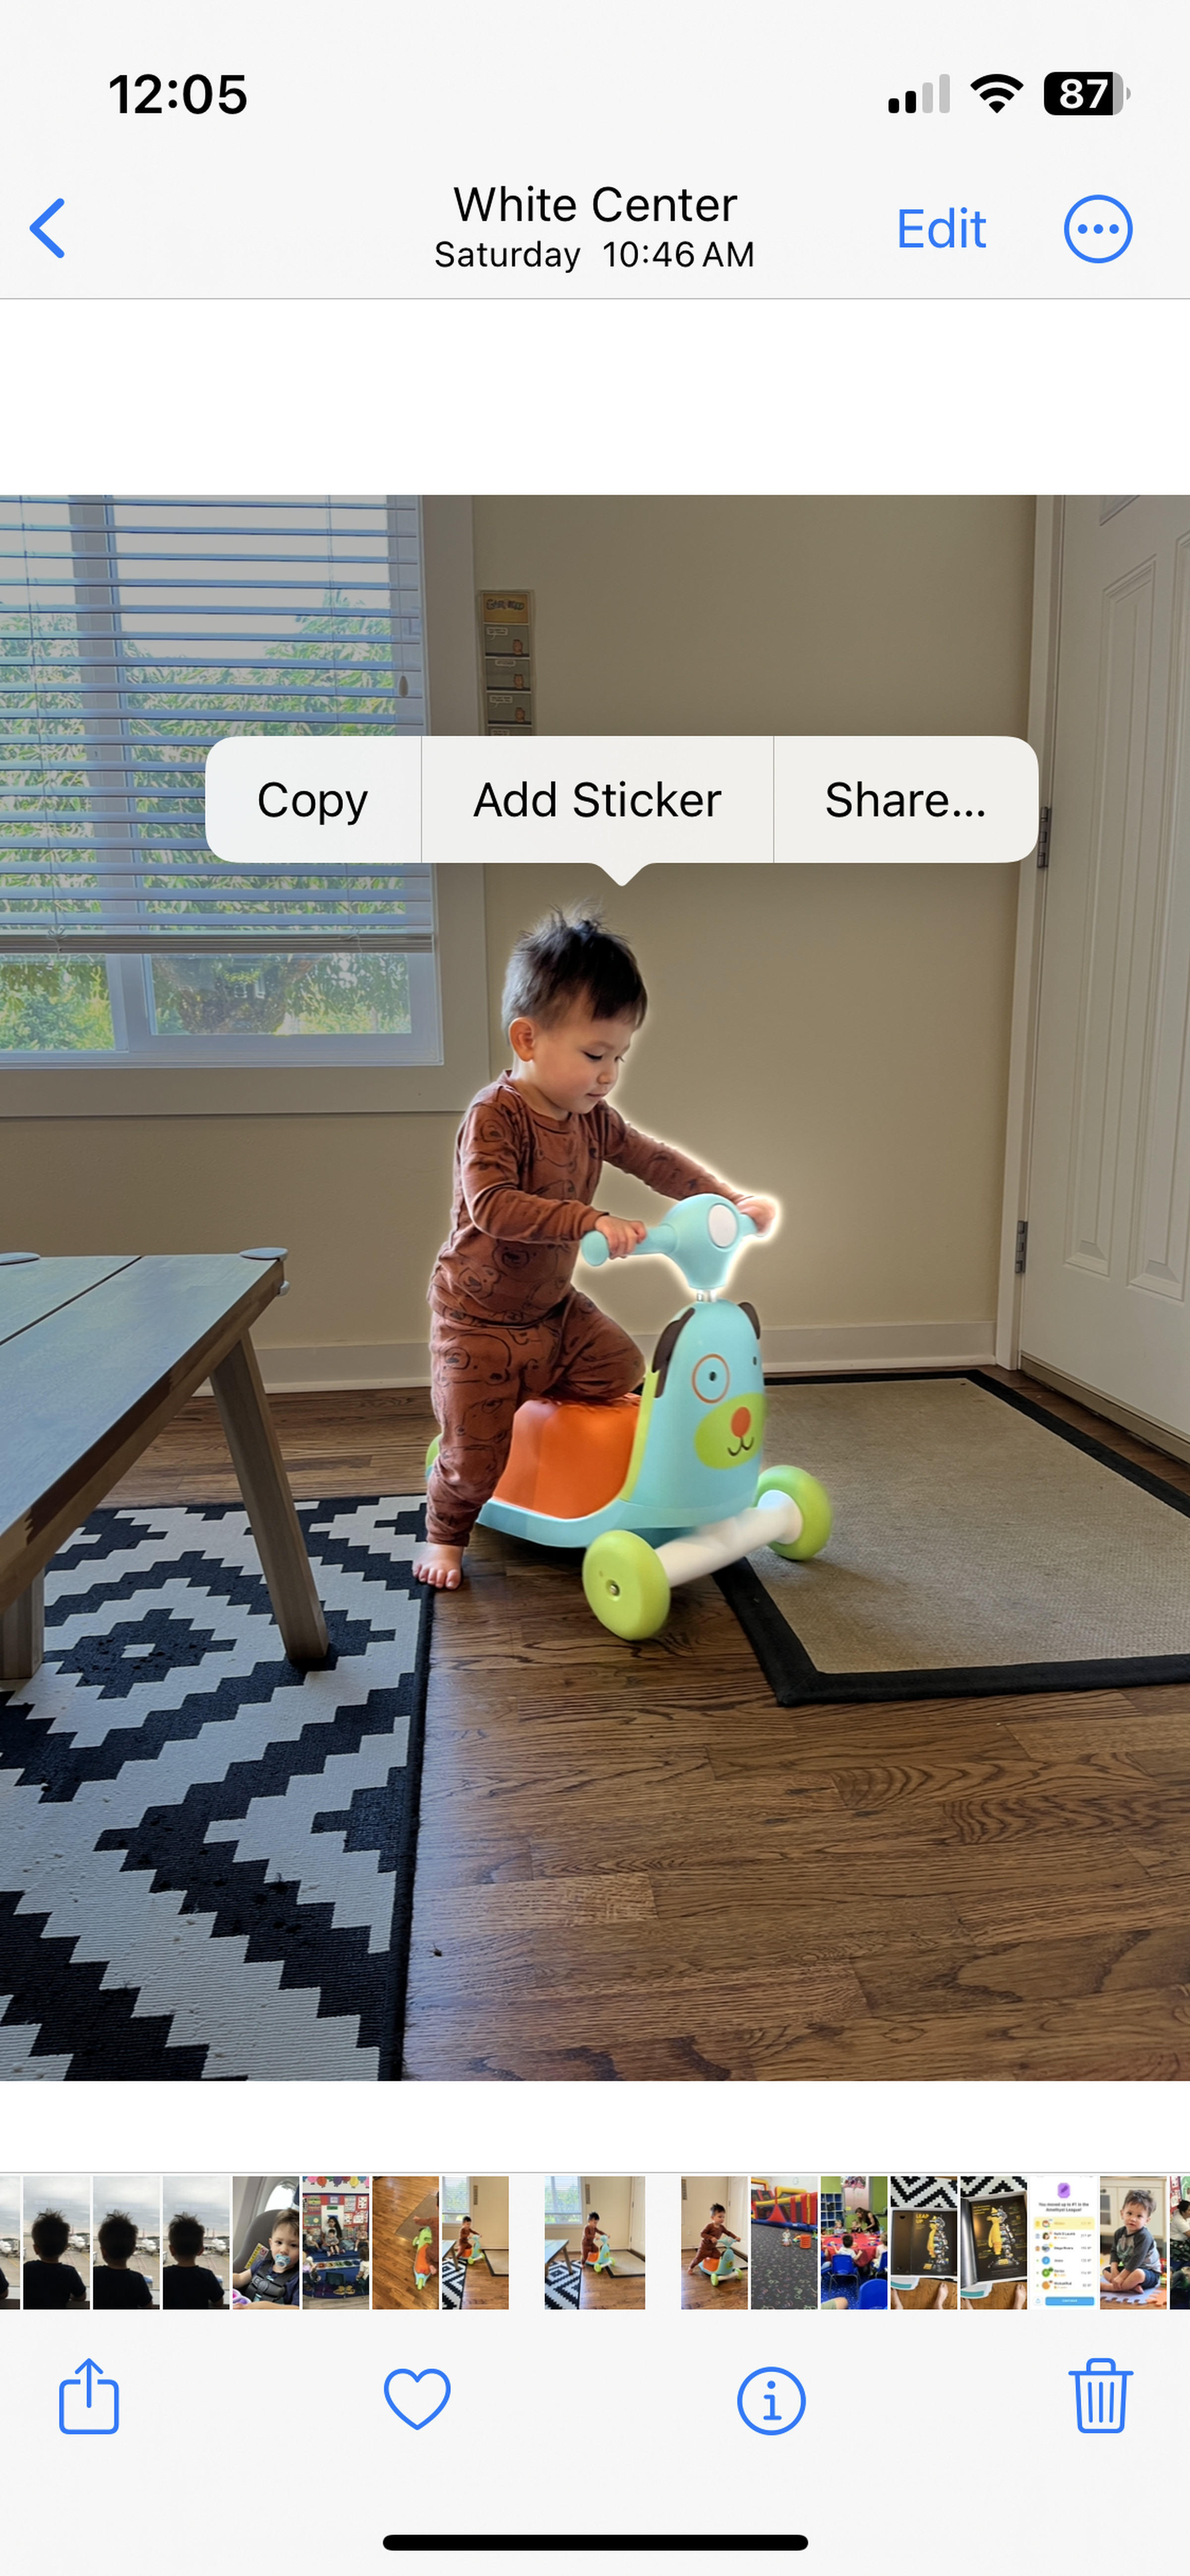 Screengrab of a photo of a child using a scooter.